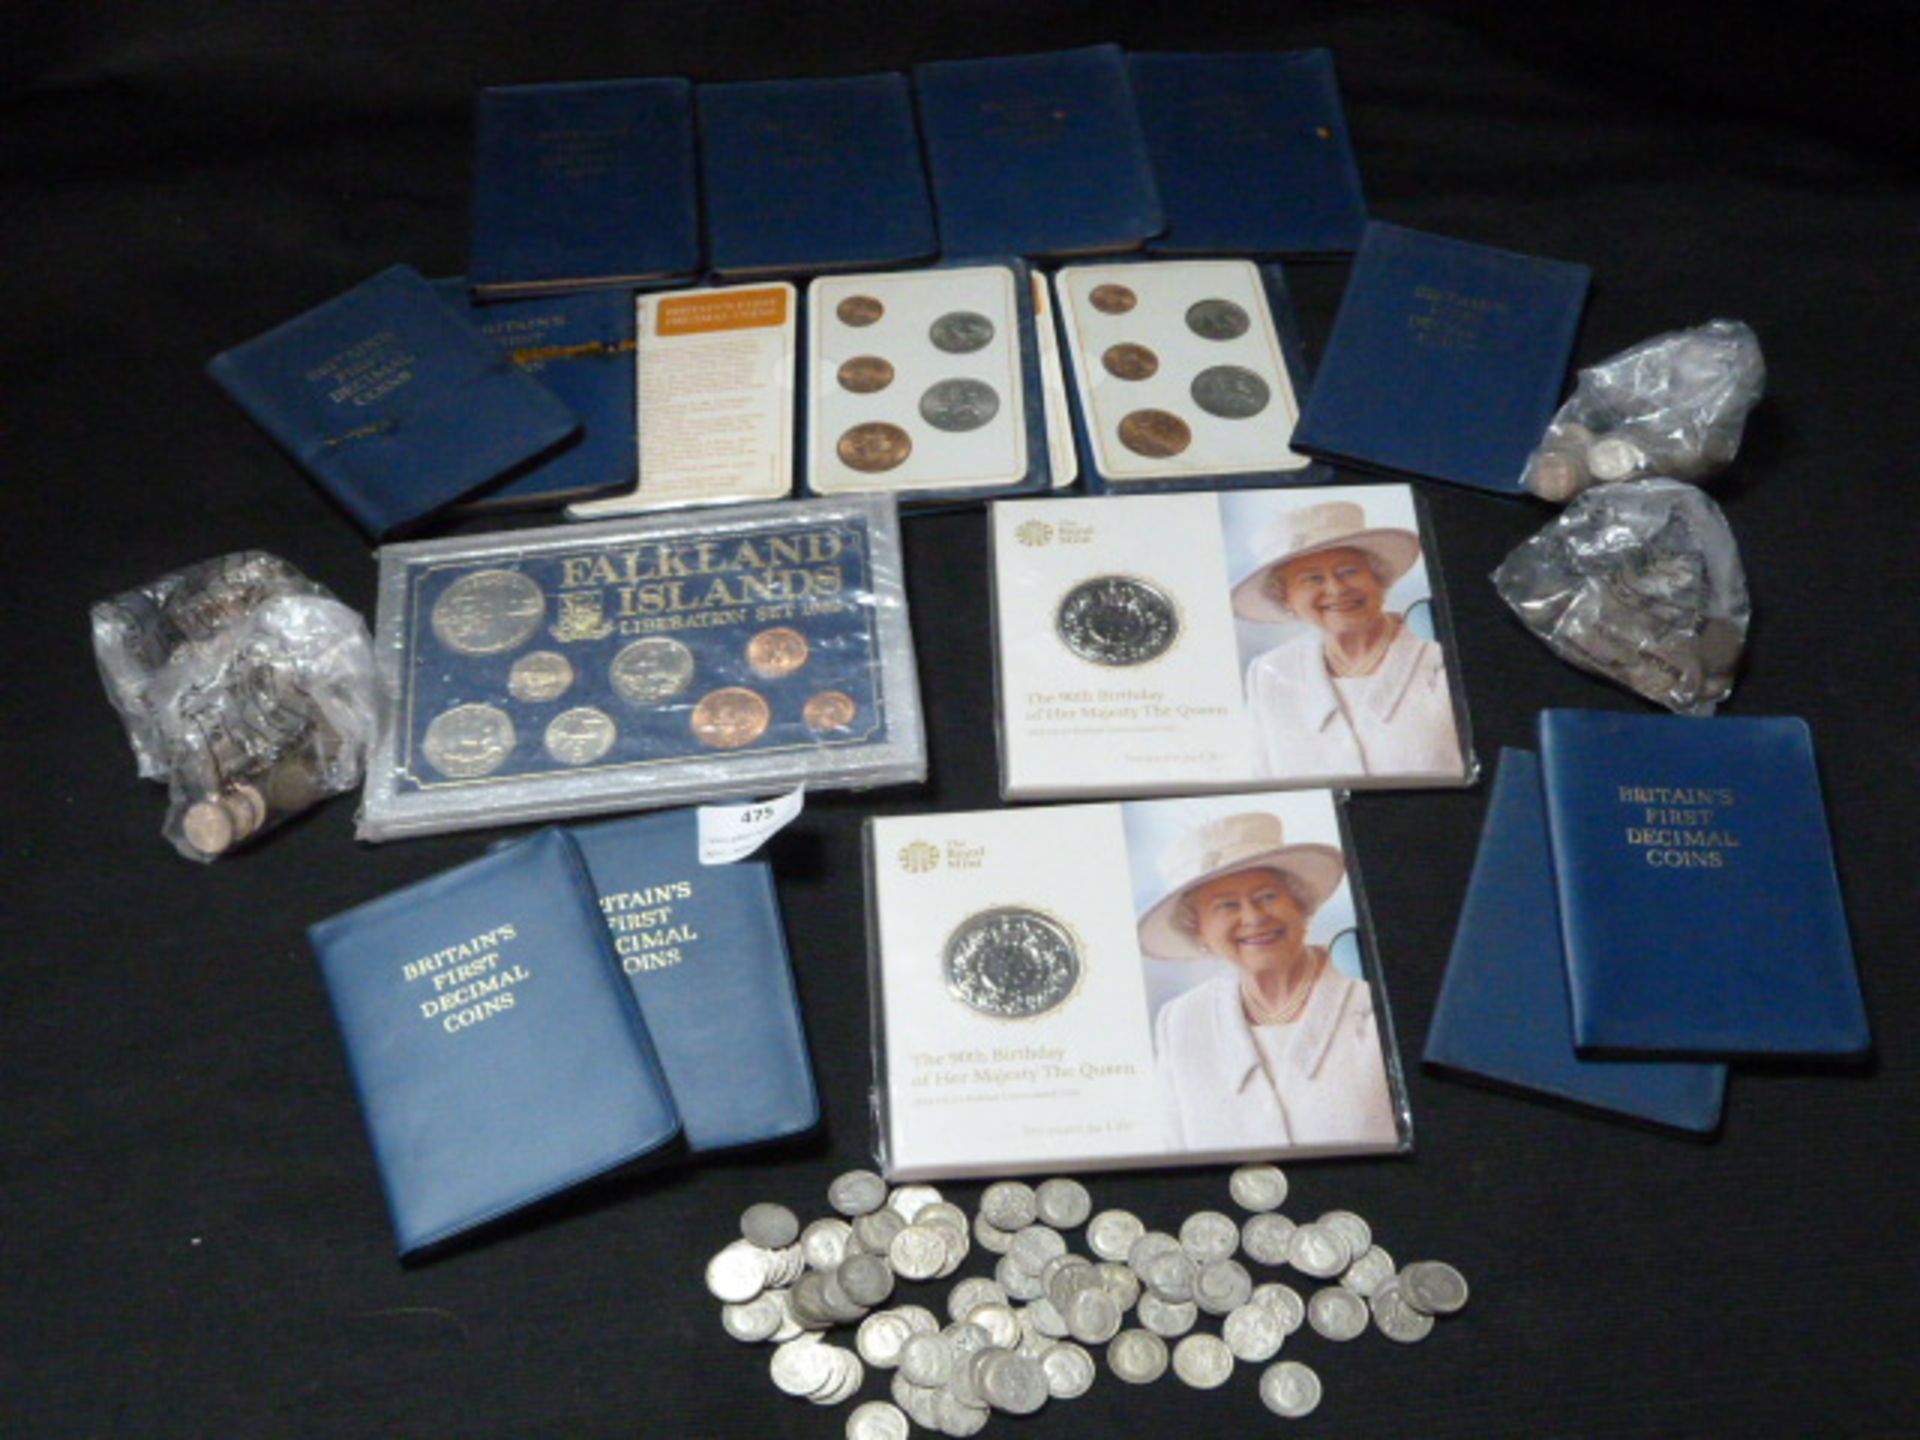 Collection of Assorted Coinage